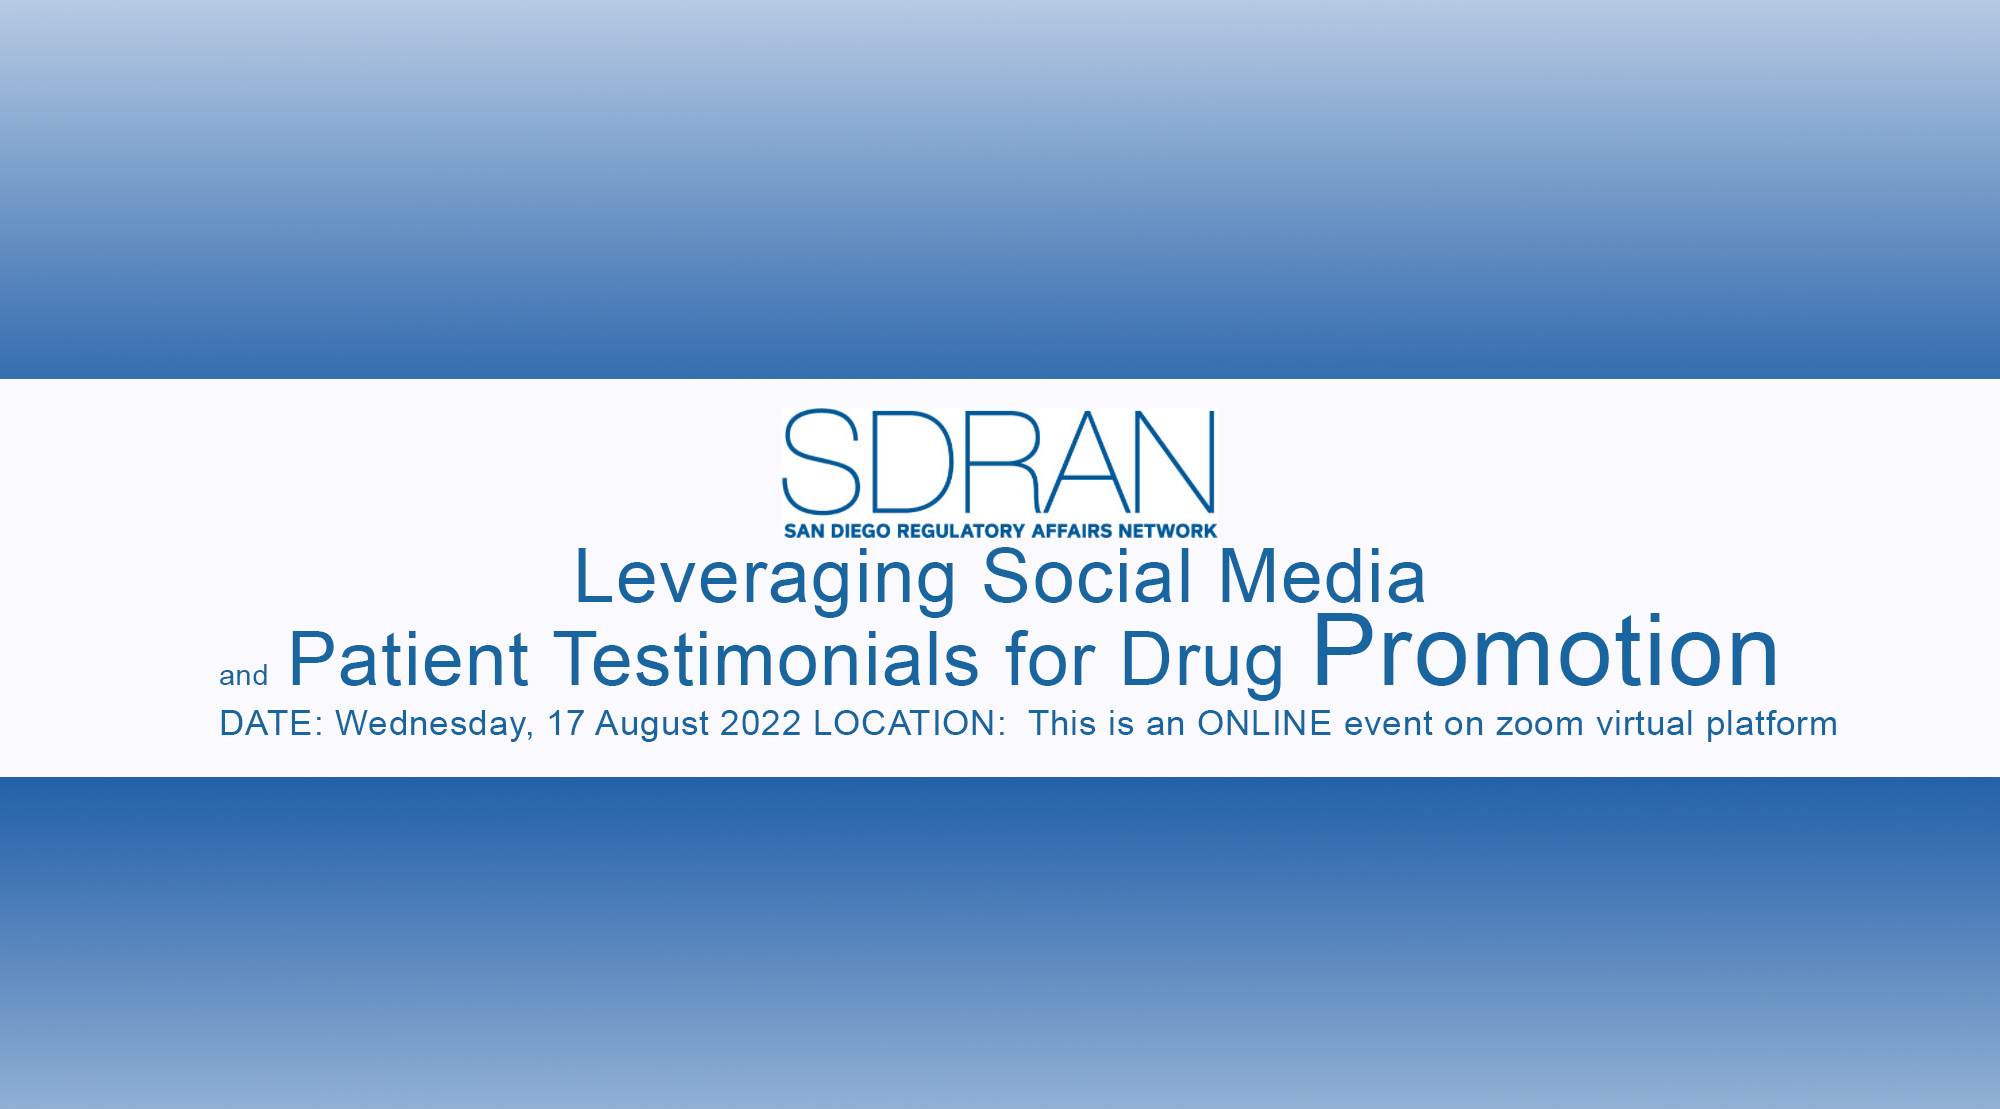 Leveraging Social Media and Patient Testimonials for Drug Promotion and Understanding Interactions with Patient and Advocacy Groups